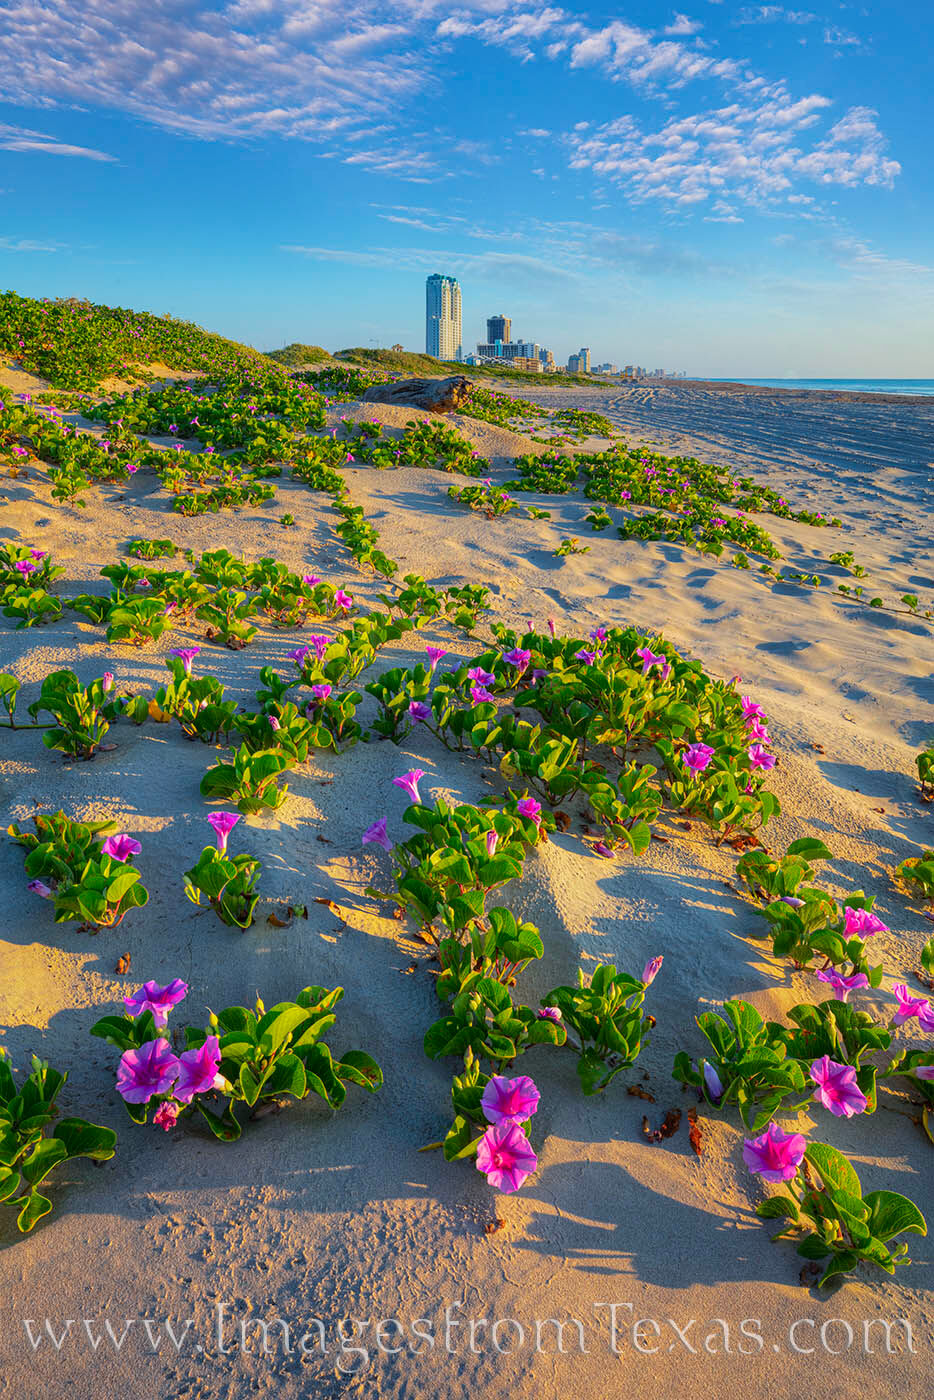 South Padre Island's skyline rises from the sand dunes on a summer morning.